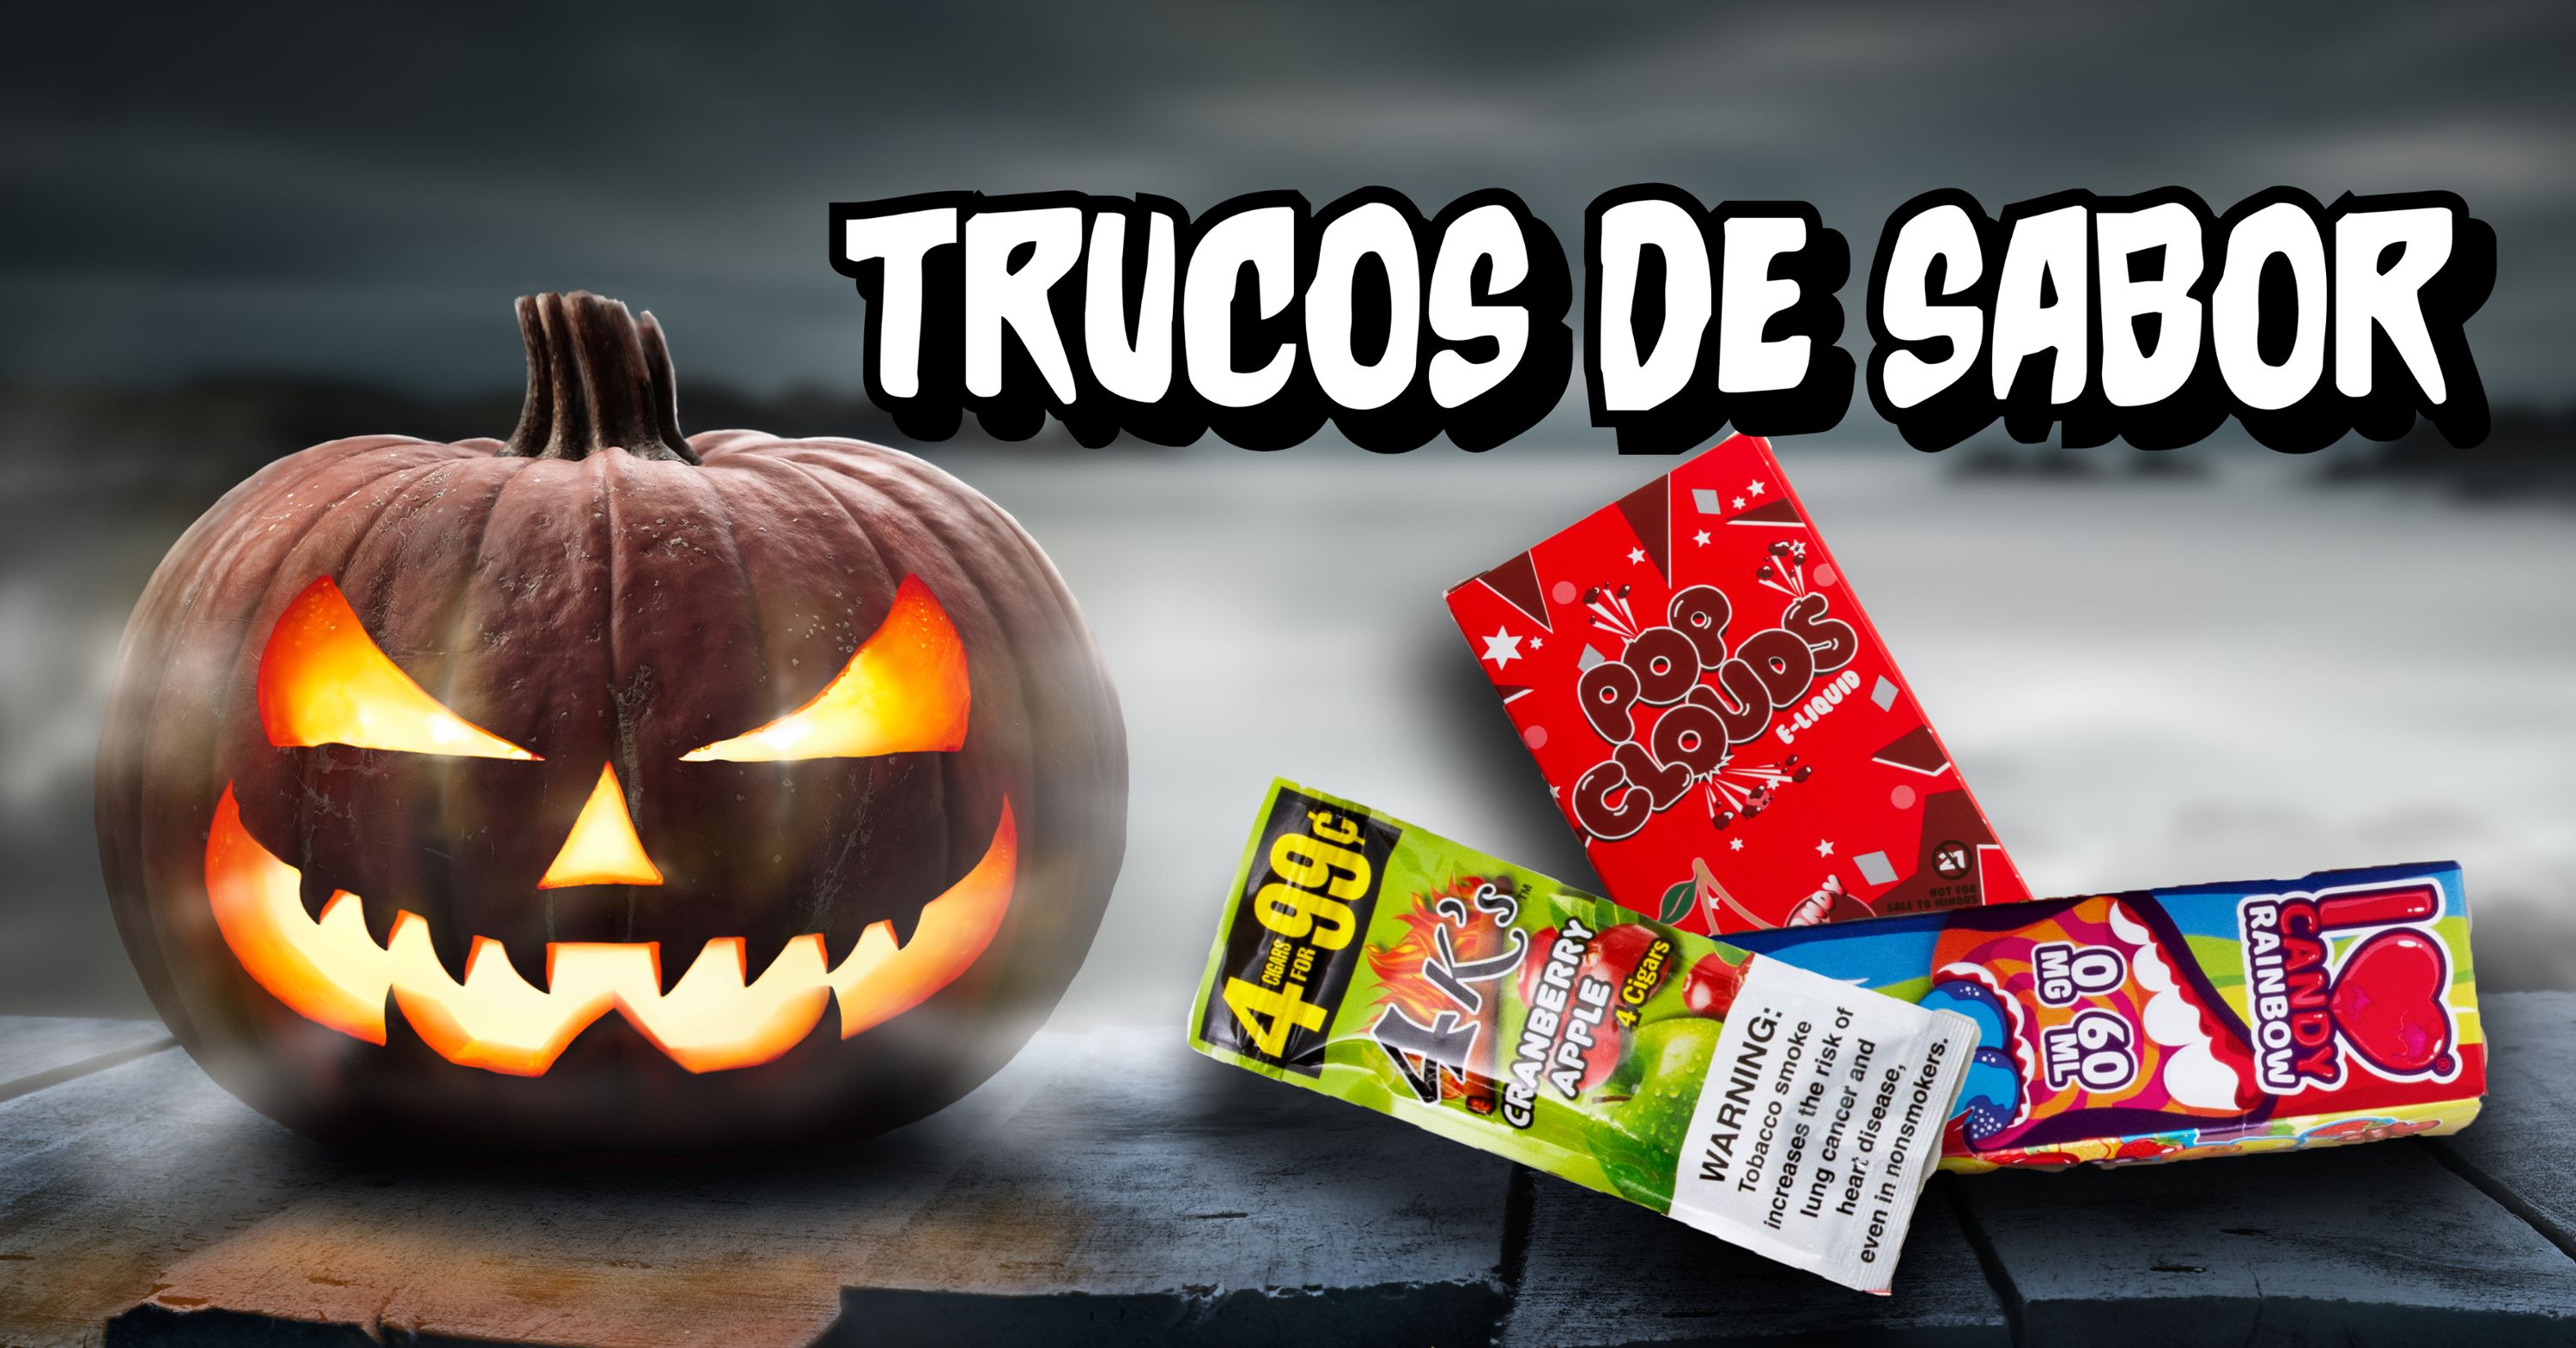 Flavor Tricks (includes a jack-o-lantern and flavored tobacco products)